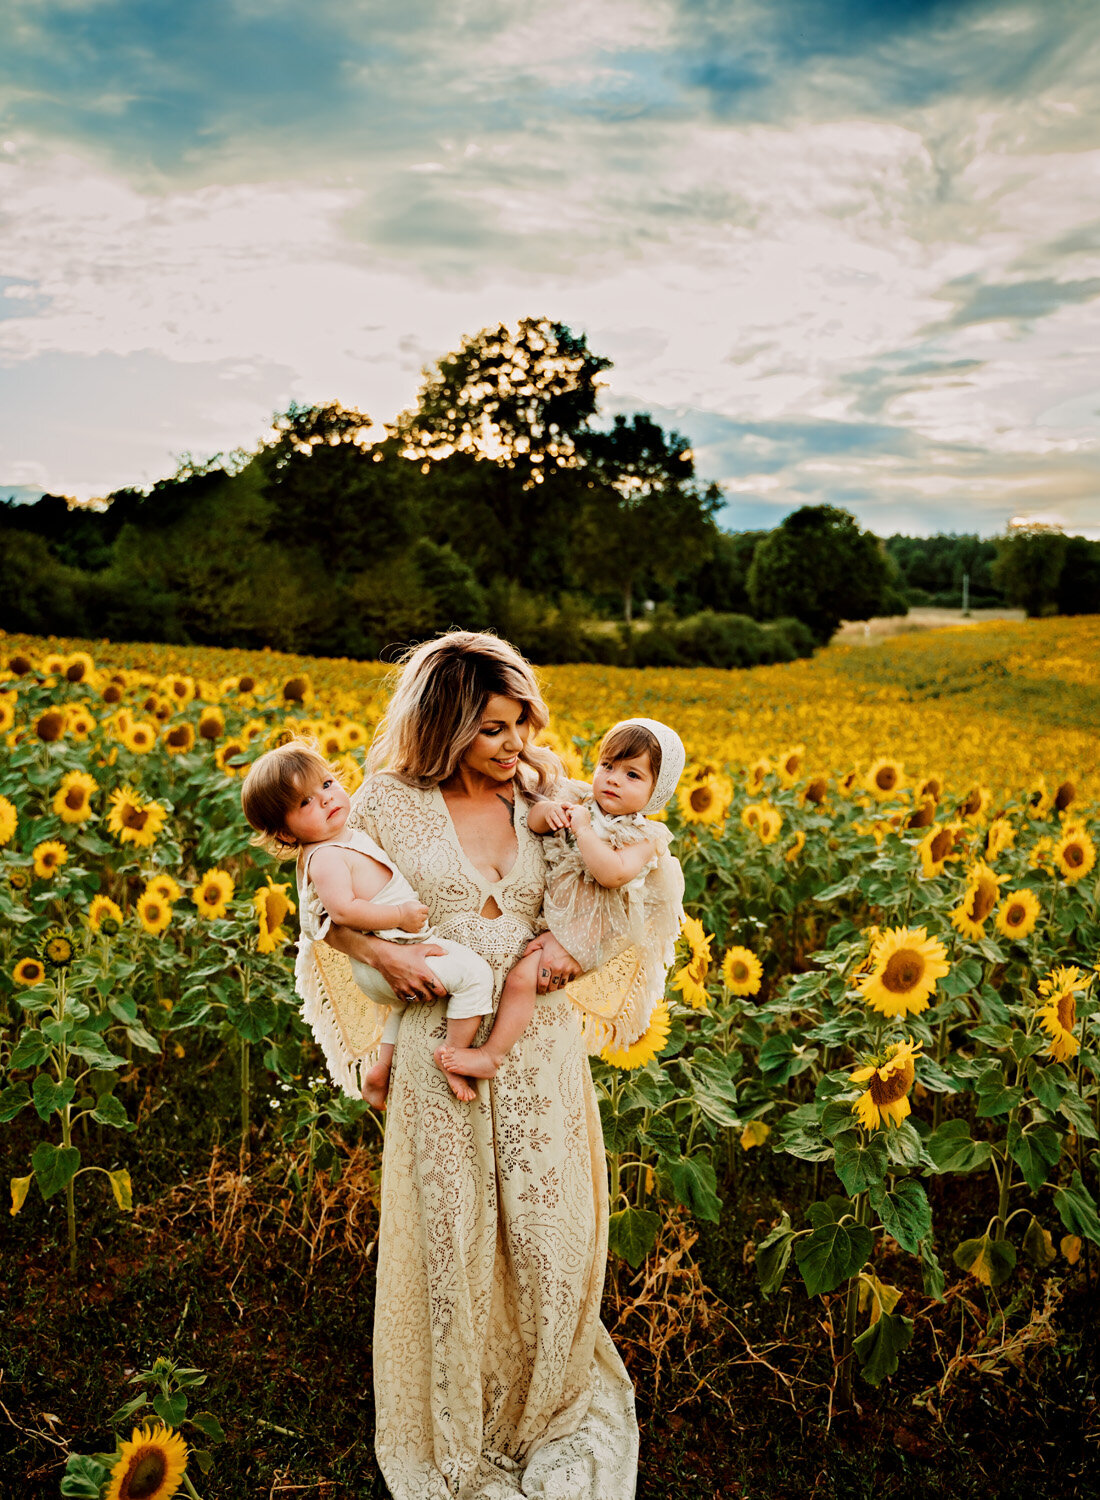  Beautiful family photo session in s big sunflower field. Young family with twins in boho outfits and flutter dress by ramstein kmc family photographer sarah havens - photo of mother holding twins 